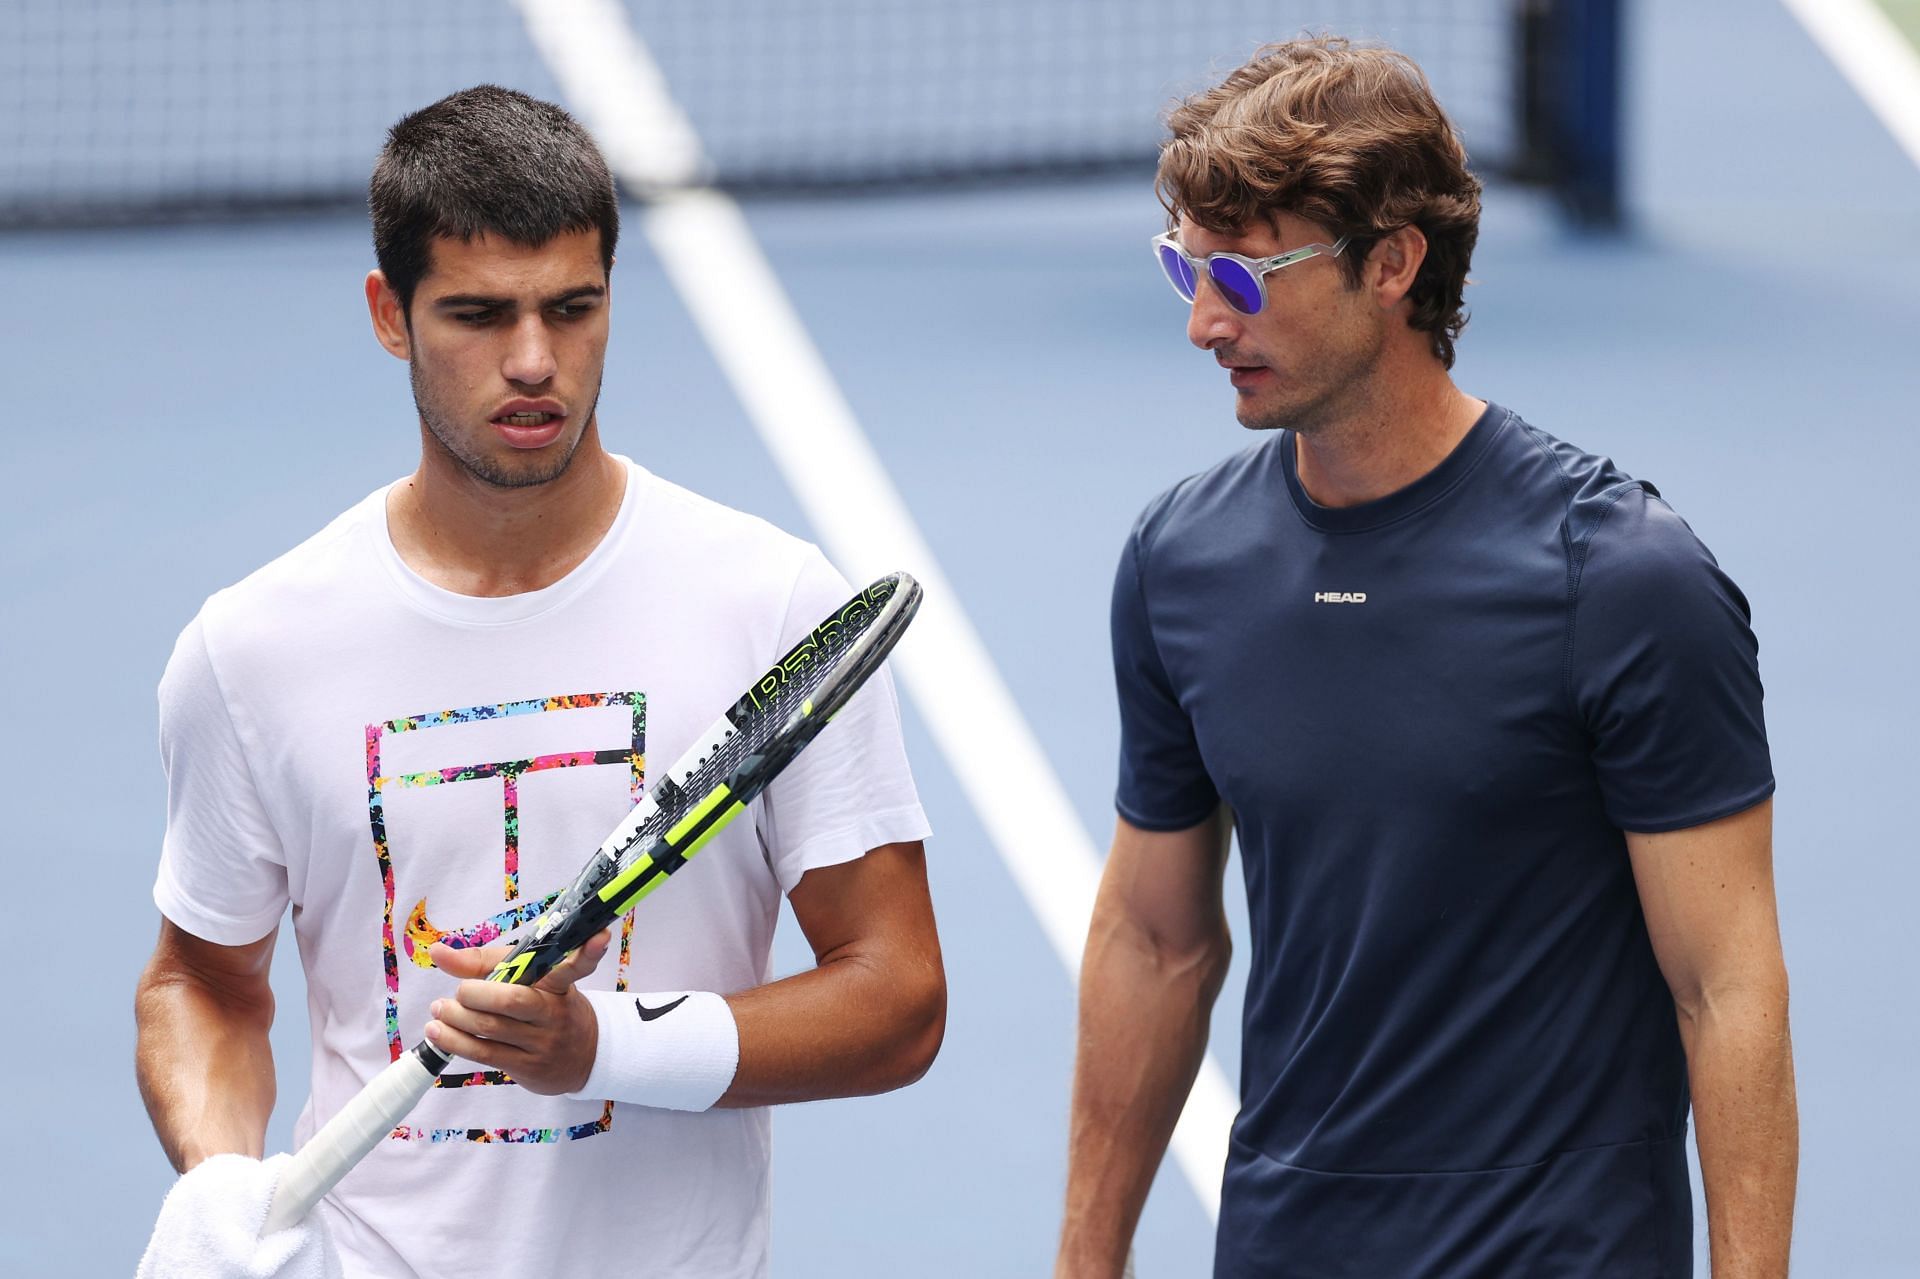 Carlos Alcaraz and his coach Juan Carlos Ferrero during a practice session at the 2022 US Open